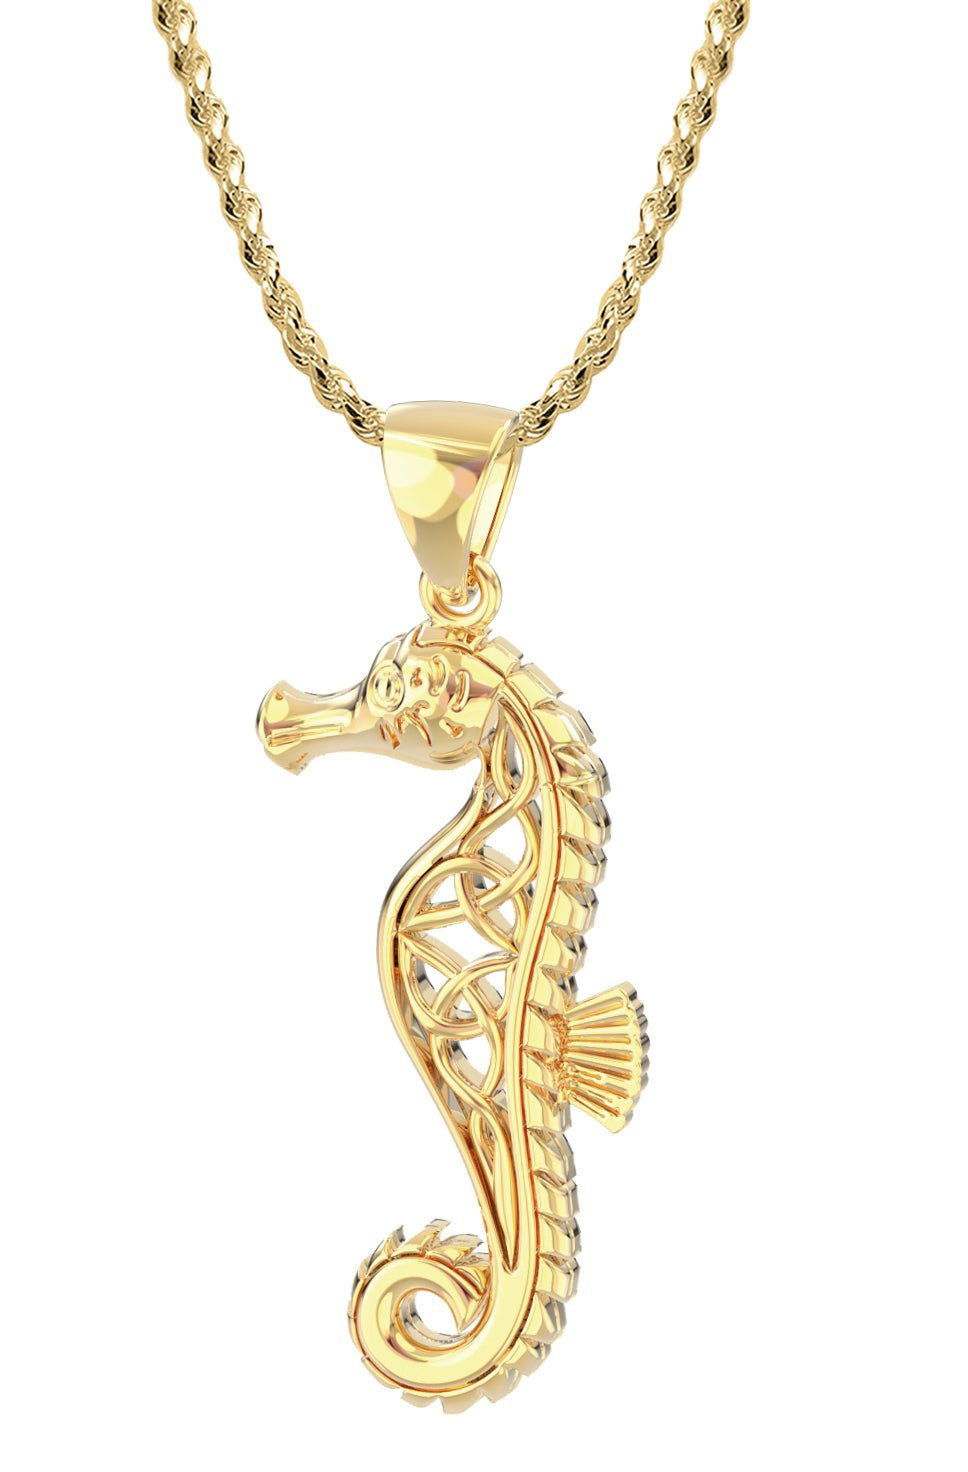 Solid 14k Yellow Gold Celtic Knot Seahorse Aquatic Pendant Necklace, 36mm - US Jewels